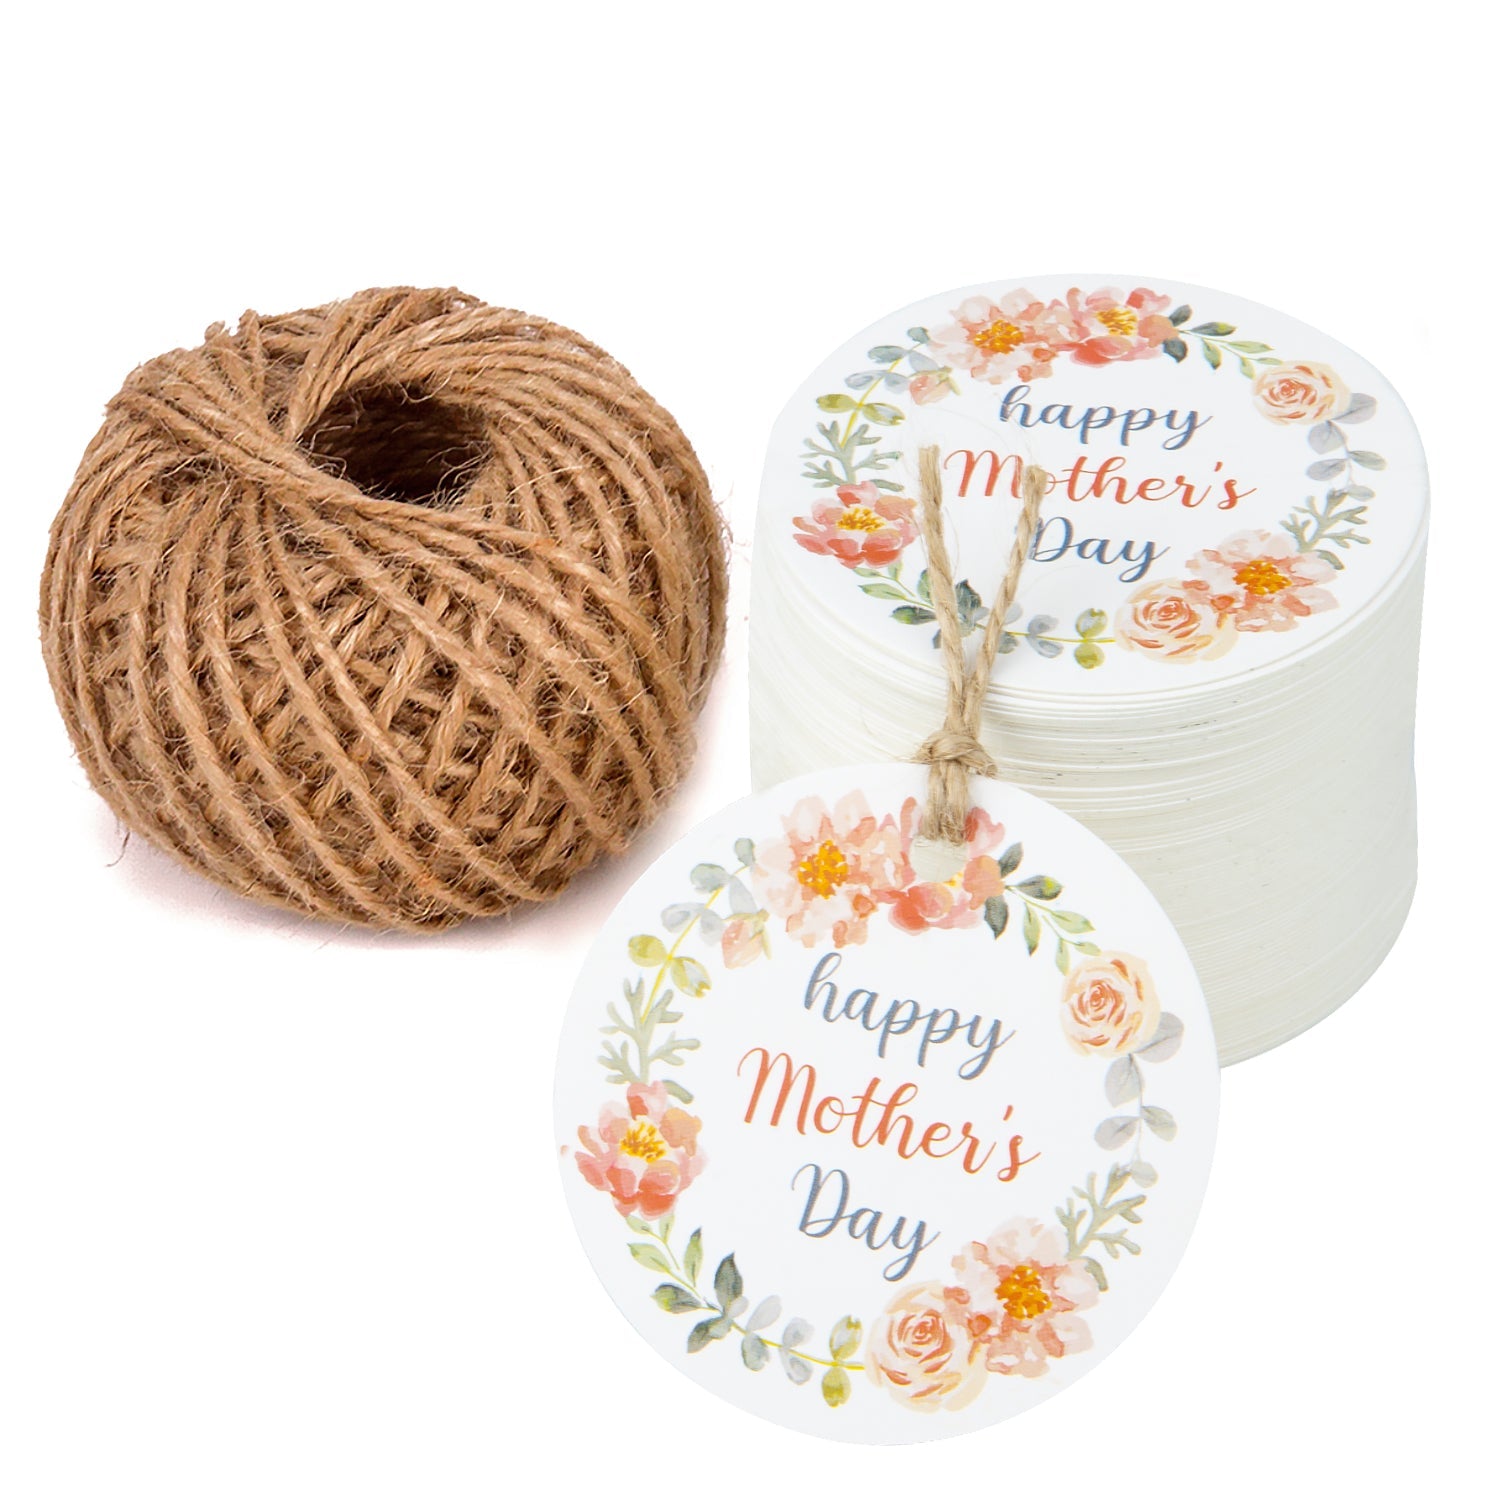 Gift Tags with String - 100pcs Happy Mother's Day Floral Design w/ 100 Feet Natural Jute Twine